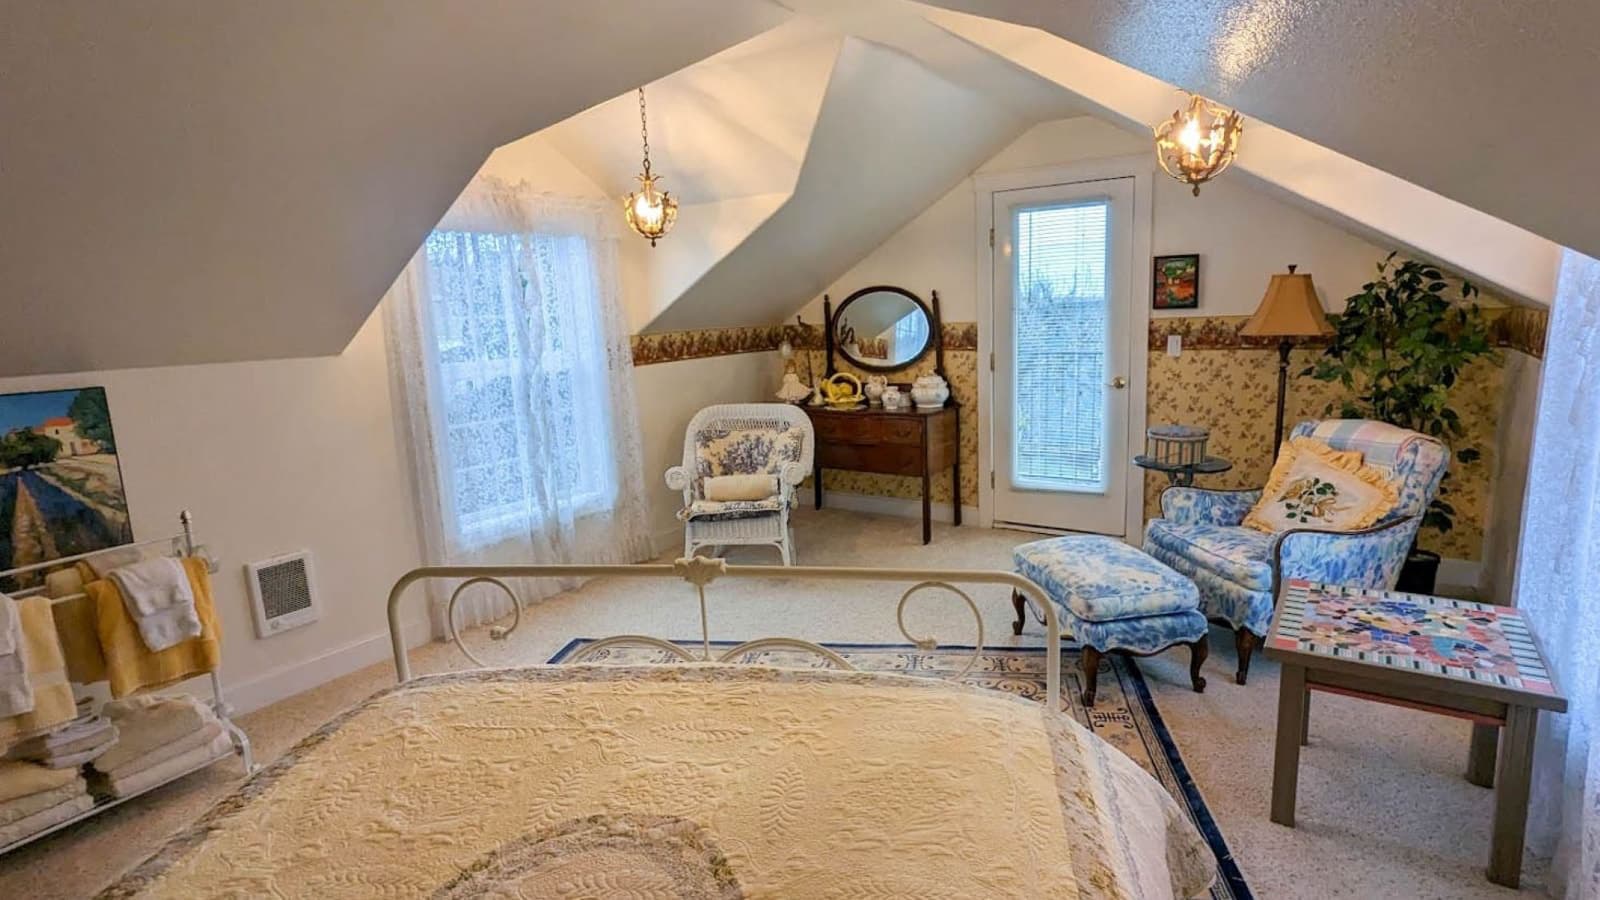 Bedroom with white walls, floral wallpaper, carpeting, white wrought iron bed with light colored quilt, and sitting area